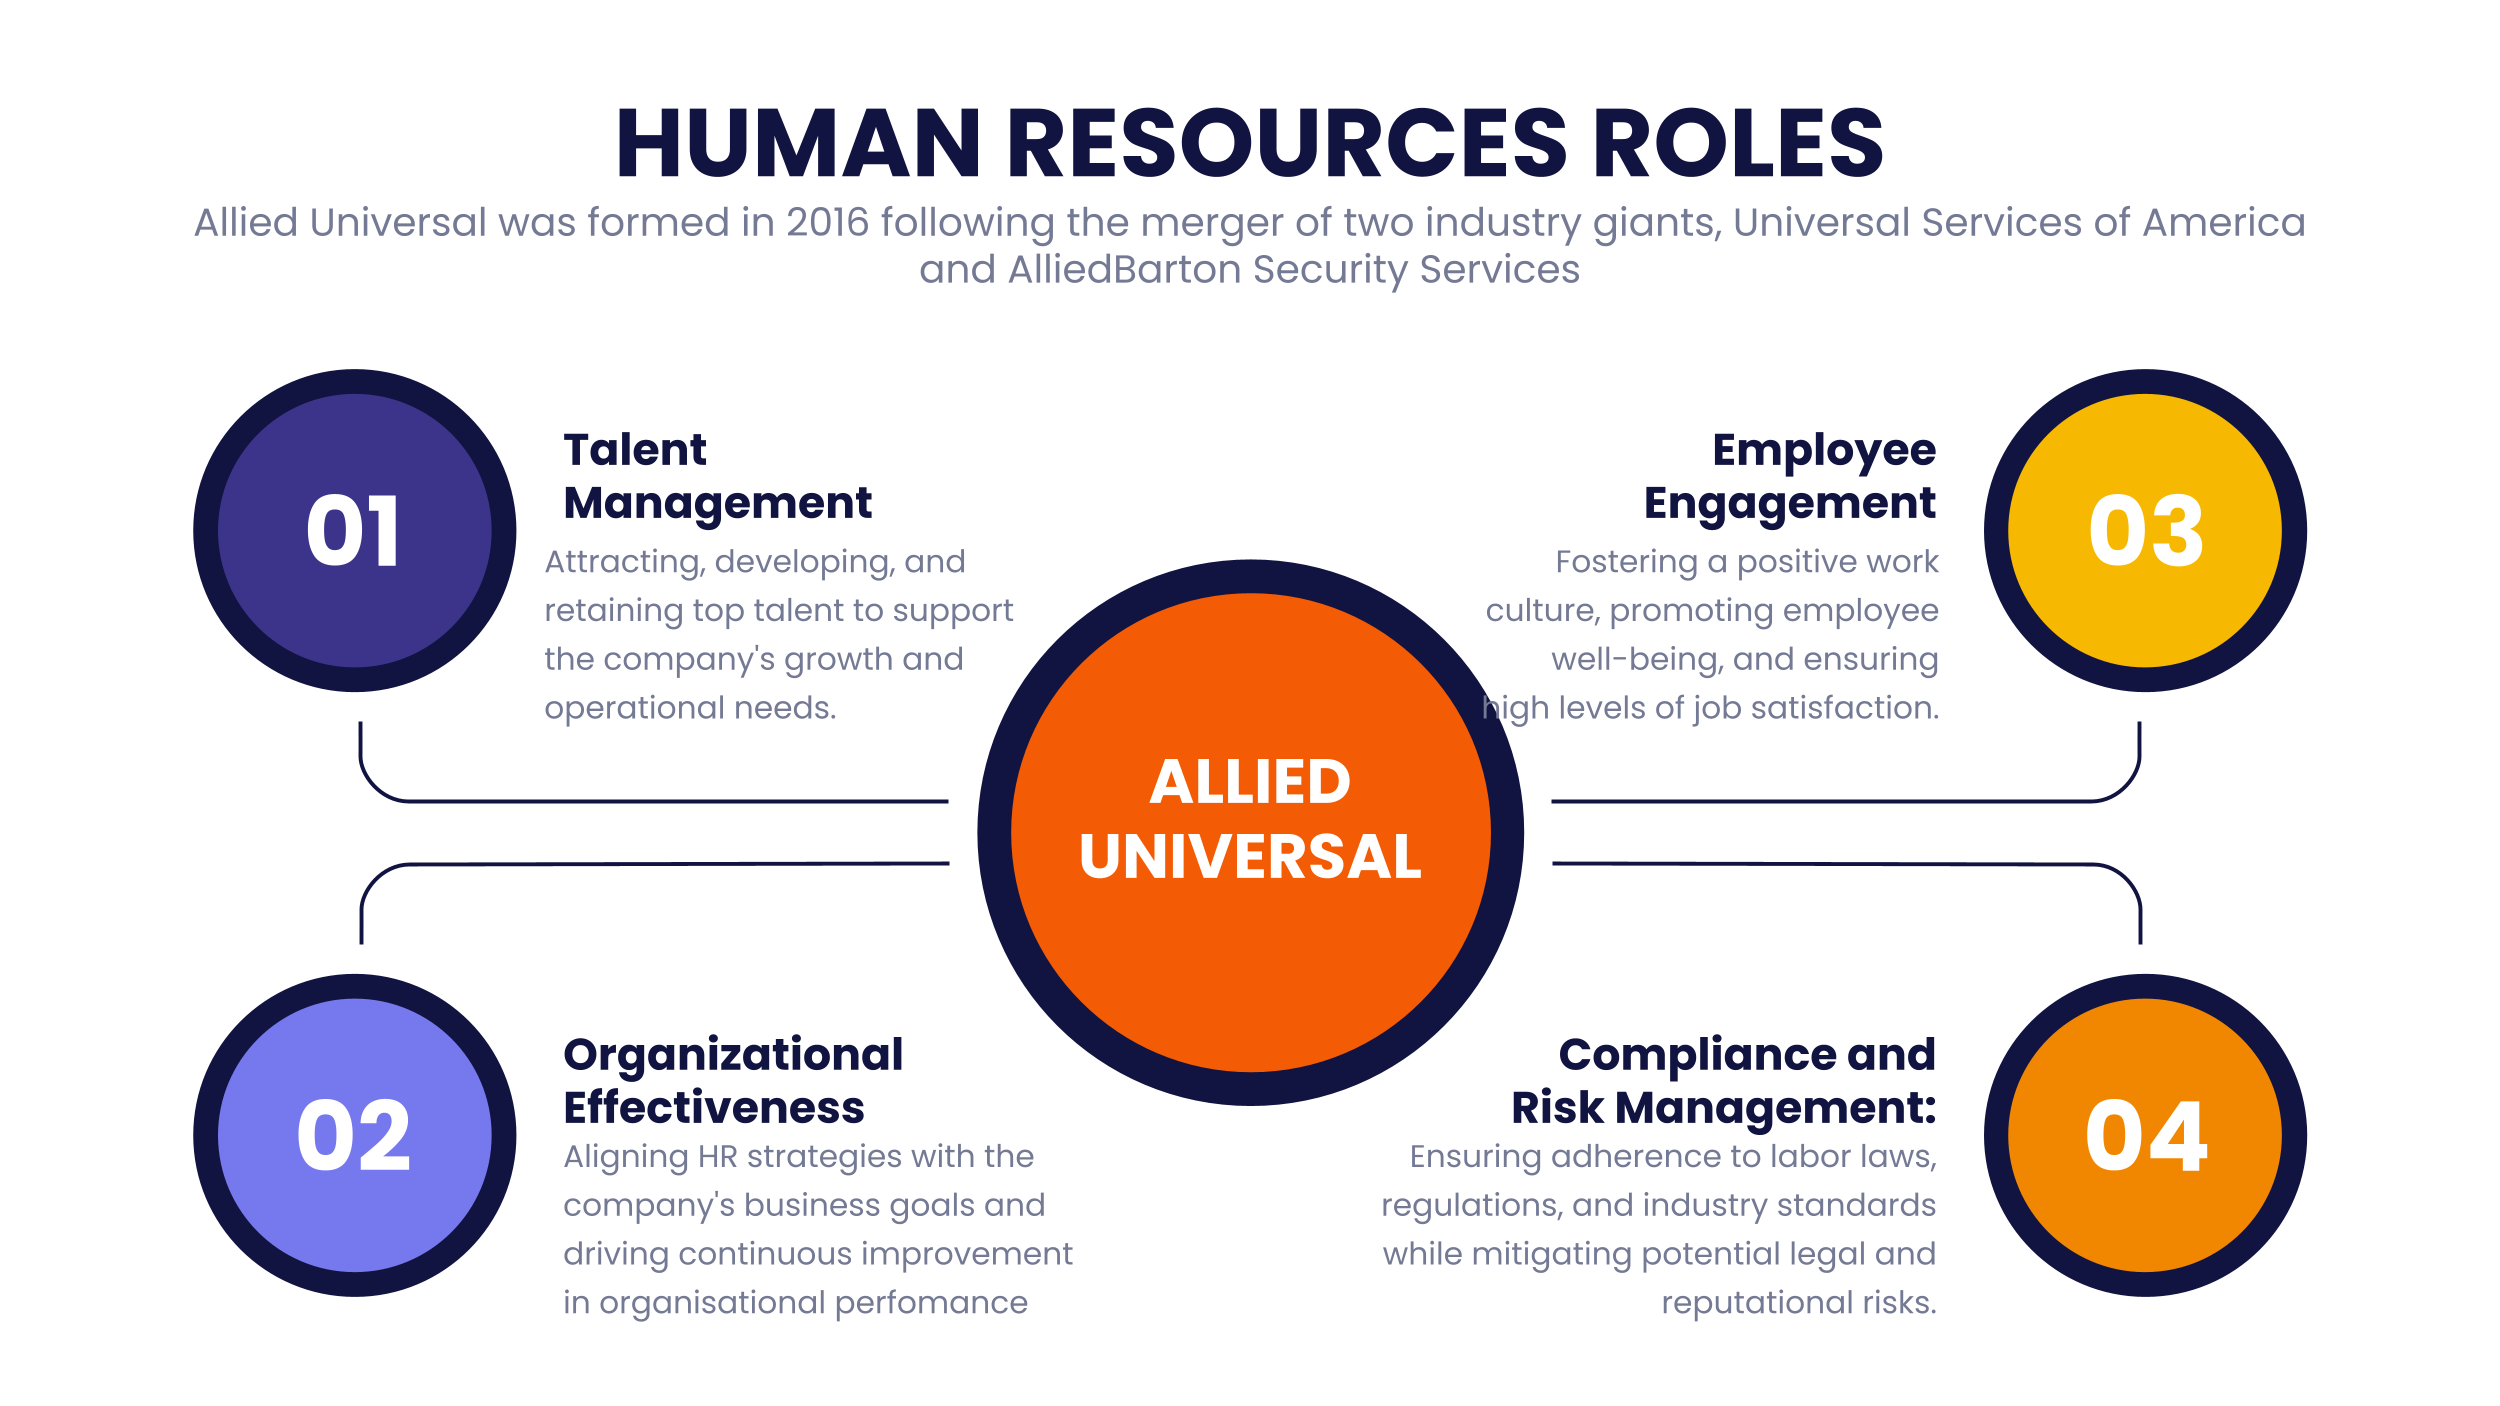 Allied Universal Human Resources: Everything you need to know